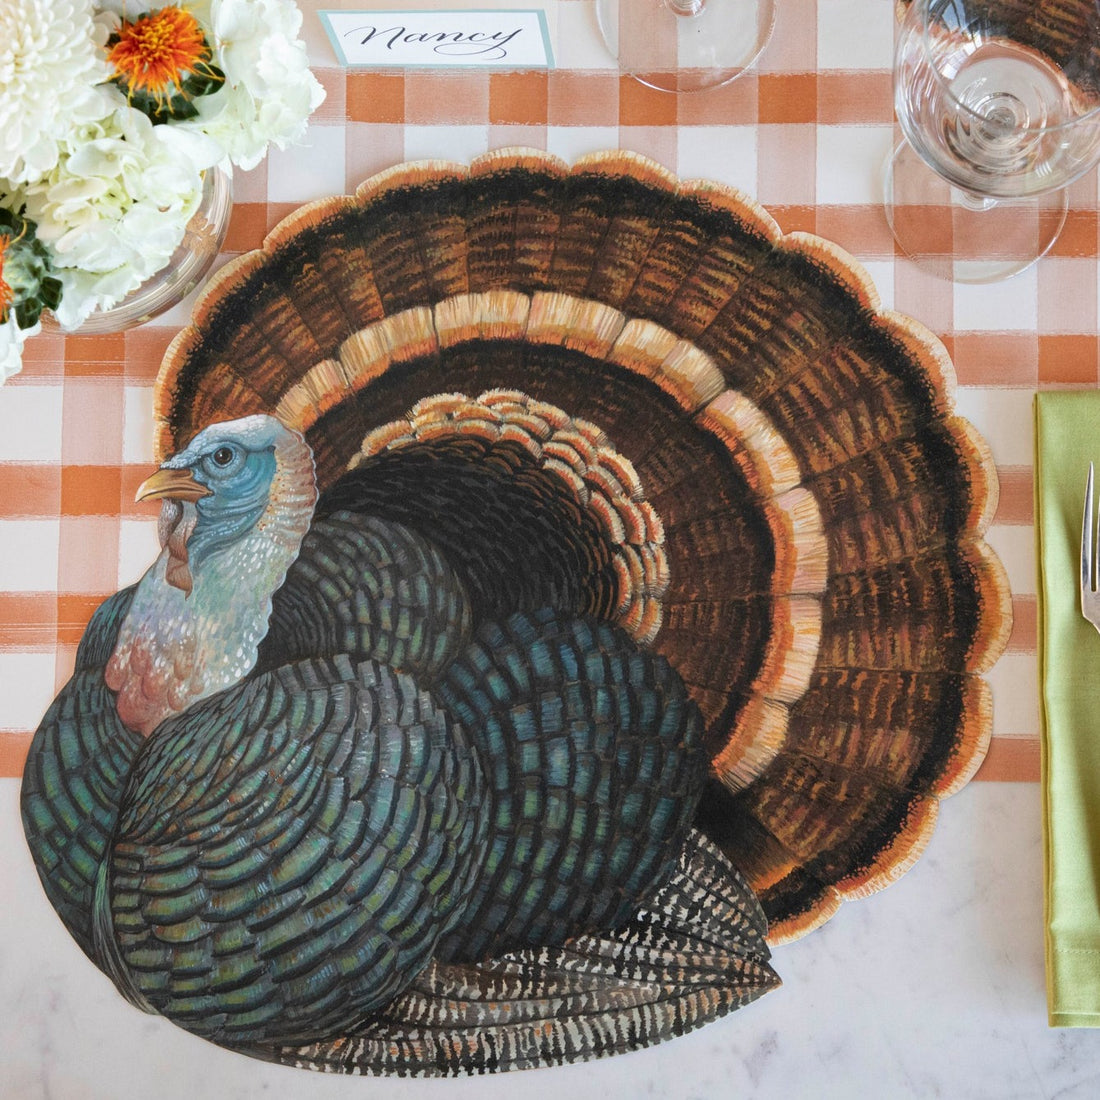 The Die-cut Heritage Turkey Placemat on an elegant Thanksgiving table setting.